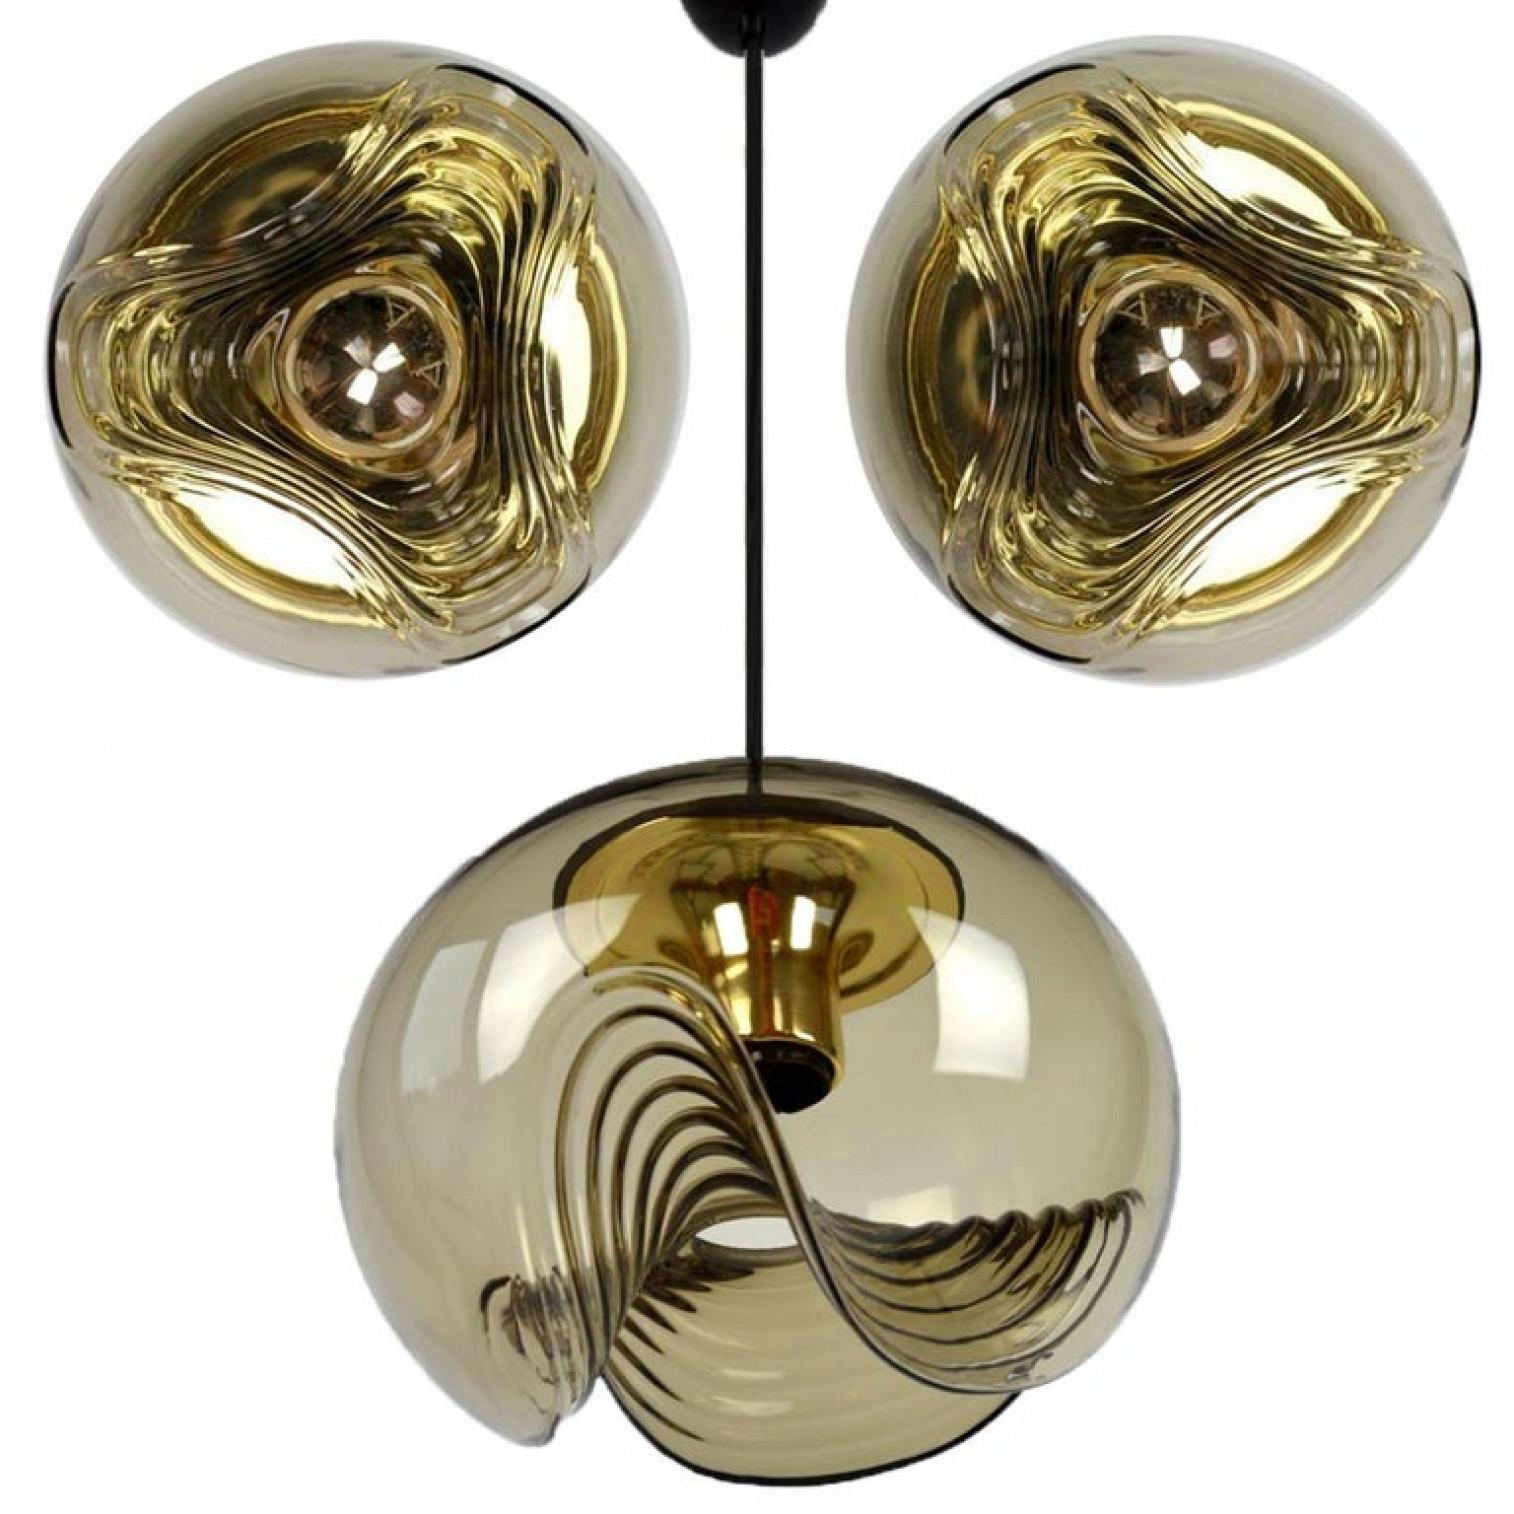 Set of Four-Light Fixtures Koch & Lowy, Two Sconces and Two Pedant Lights, 1970 For Sale 2